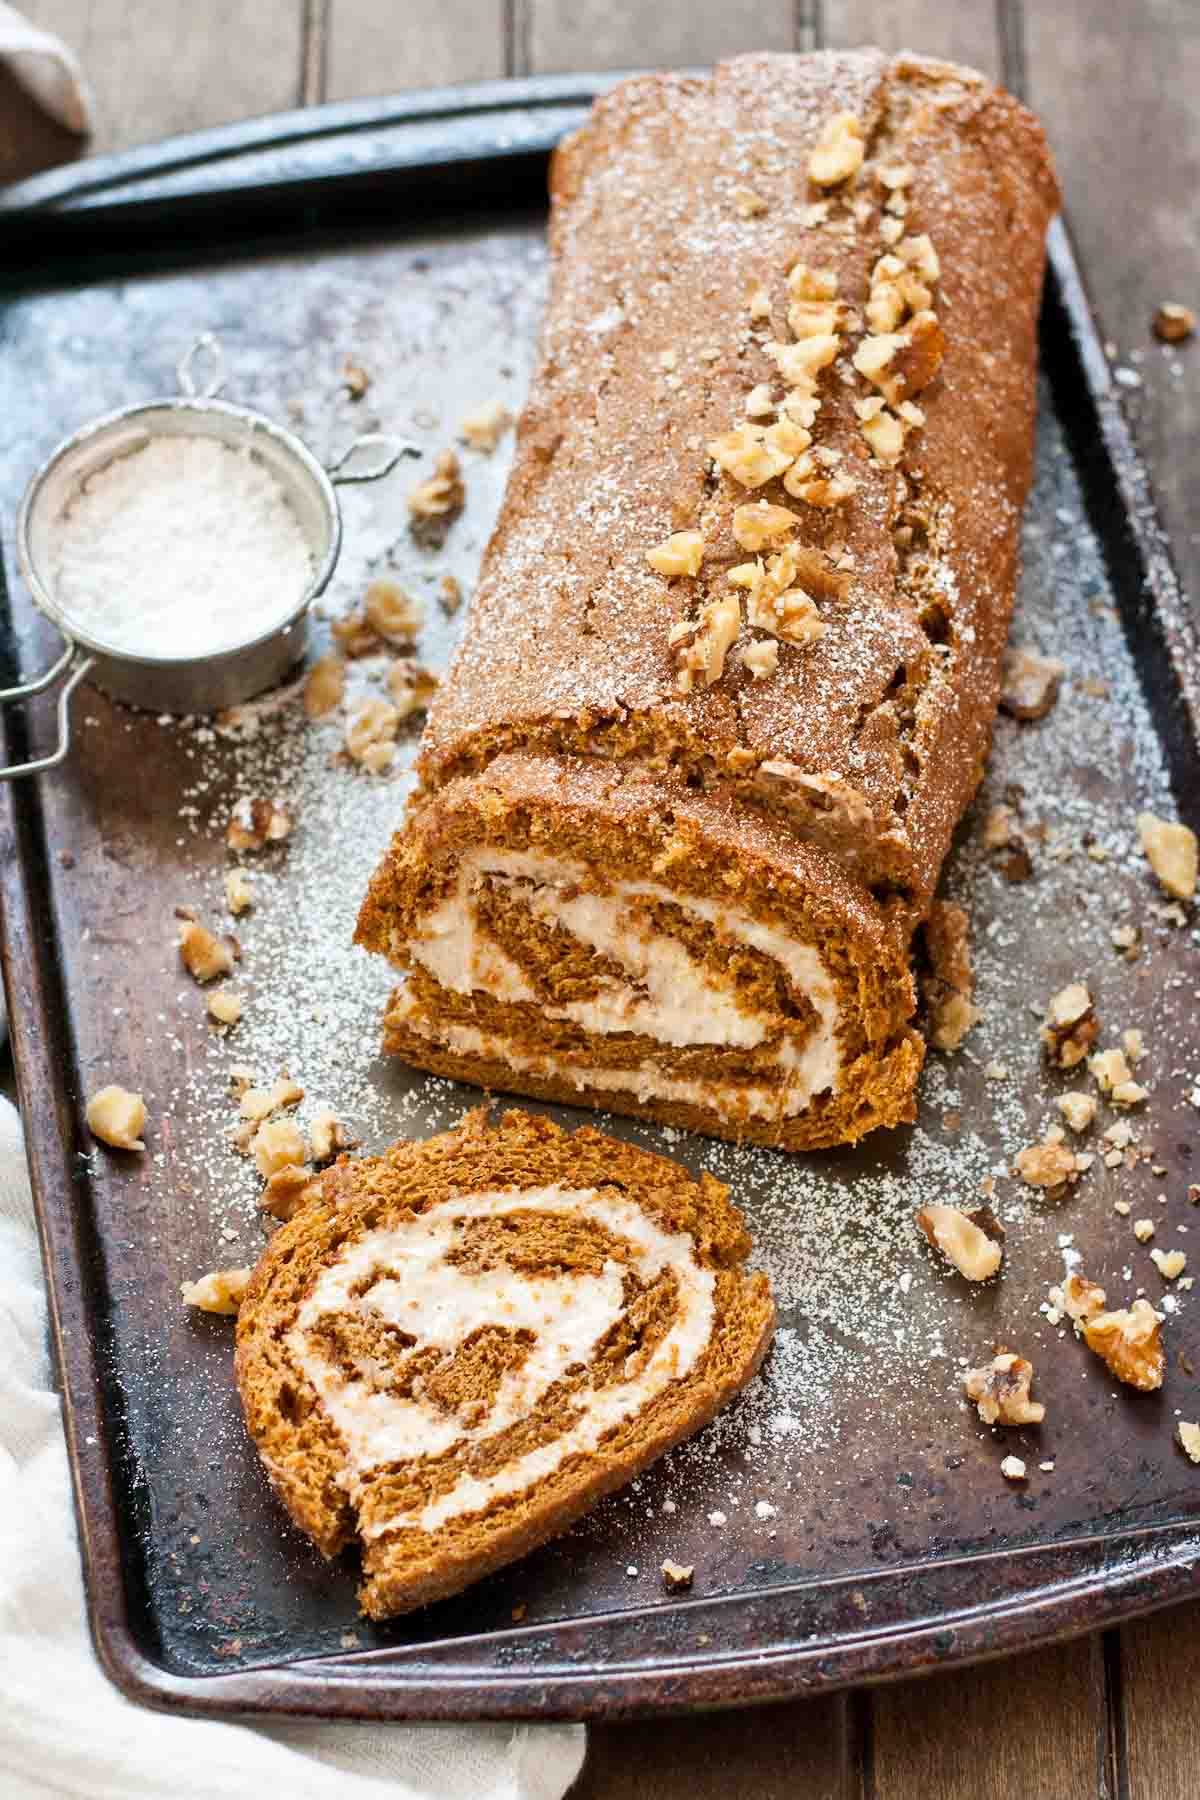 This Gingerbread Cake Roll is the perfect dessert for Thanksgiving or Christmas. It's easy to make ahead of time and freeze!